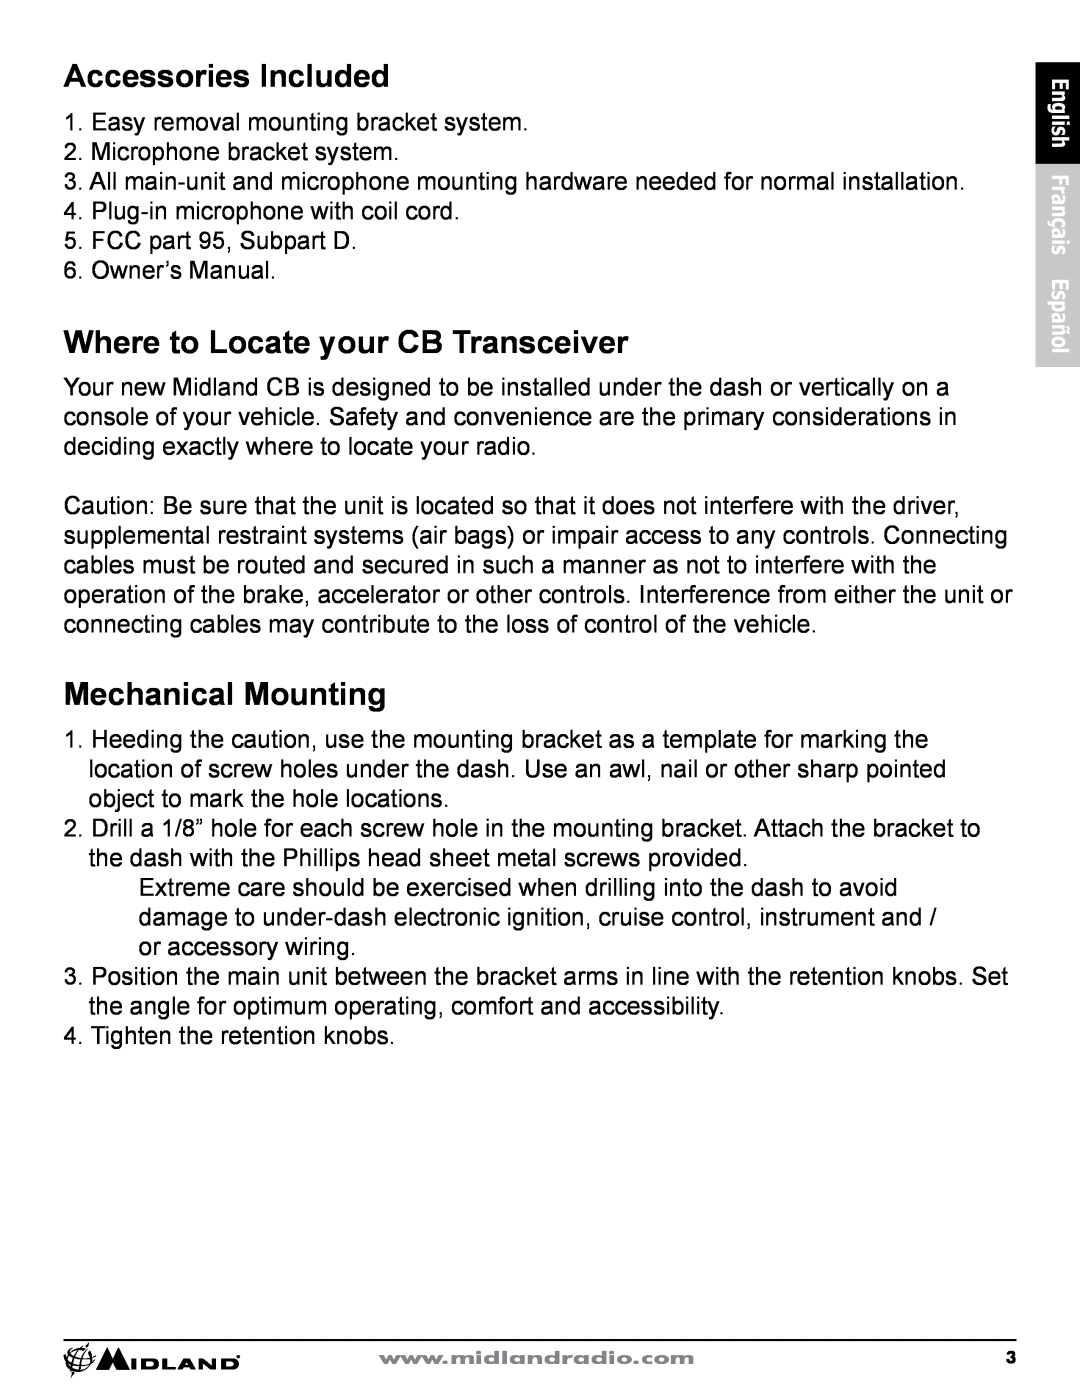 Midland Radio CB-1 owner manual Accessories Included, Where to Locate your CB Transceiver, Mechanical Mounting 